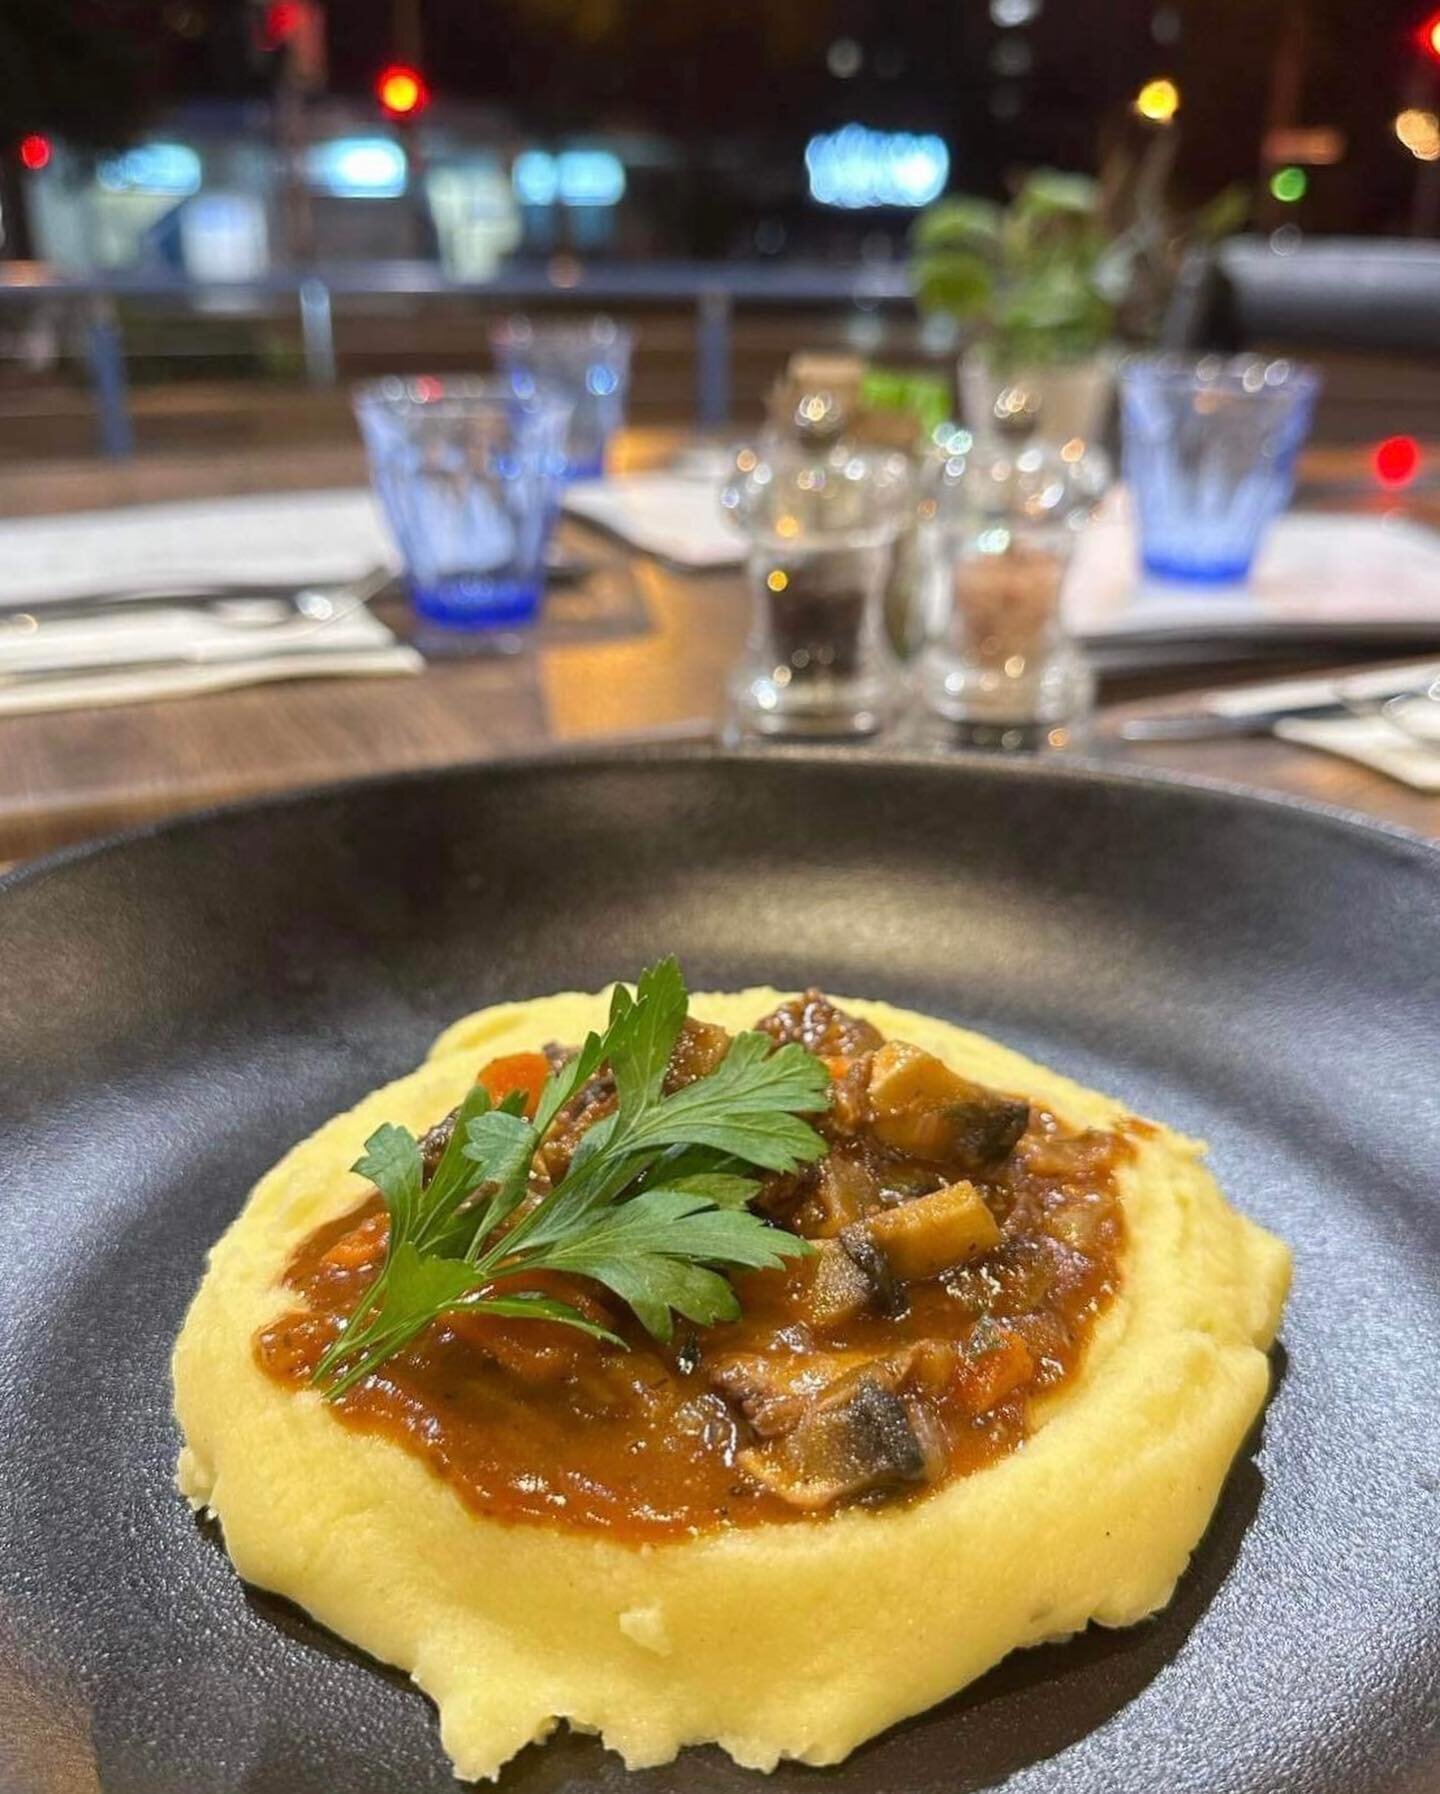 Corner special ❤️ Braised beef and mushroom rag&ugrave; with creamy mashed potatoes 
$22 Lunch and Dinner! 
.
.
.
#cafe #brisbane #Queensland #coffee #dogs
#breakfast #lunch #food #nundah #petfriendly #nundahcornercafe #eats #brisbanecafe #theweekend